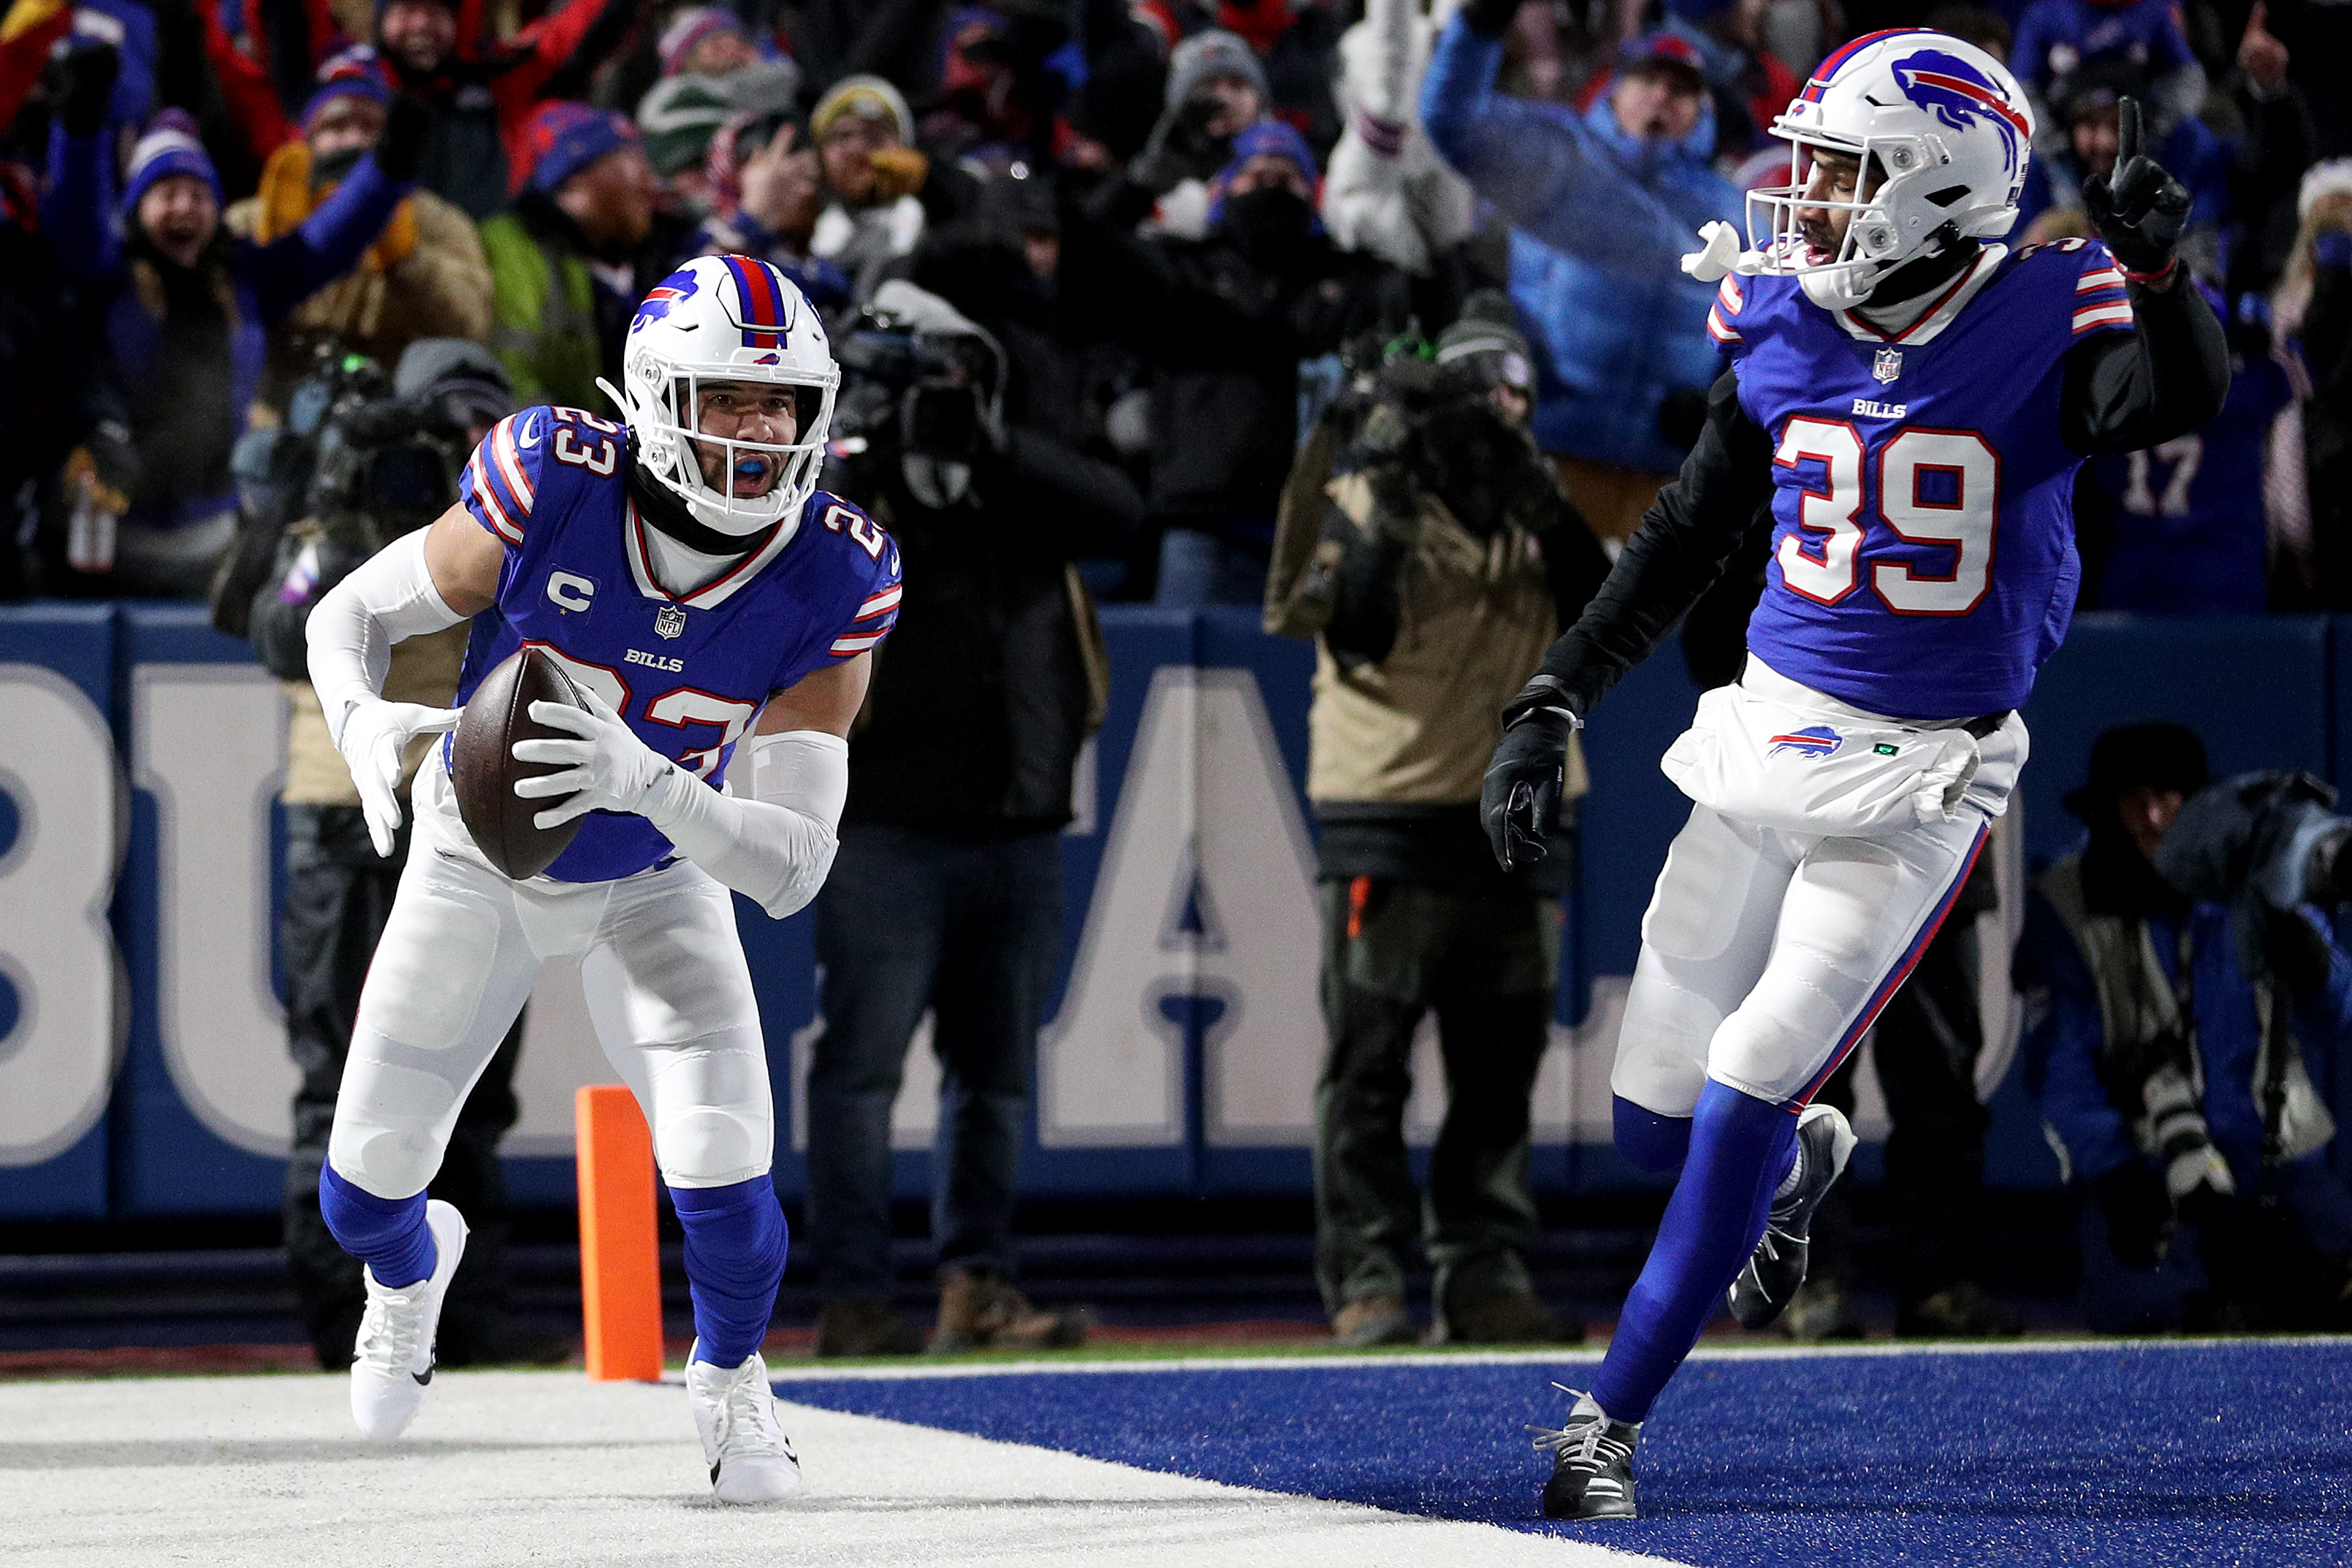 Micah Hyde #23 and Levi Wallace #39 of the Buffalo Bills react after Hyde intercepted a pass during the first quarter against the New England Patriots at Highmark Stadium on January 15, 2022 in Buffalo, New York.